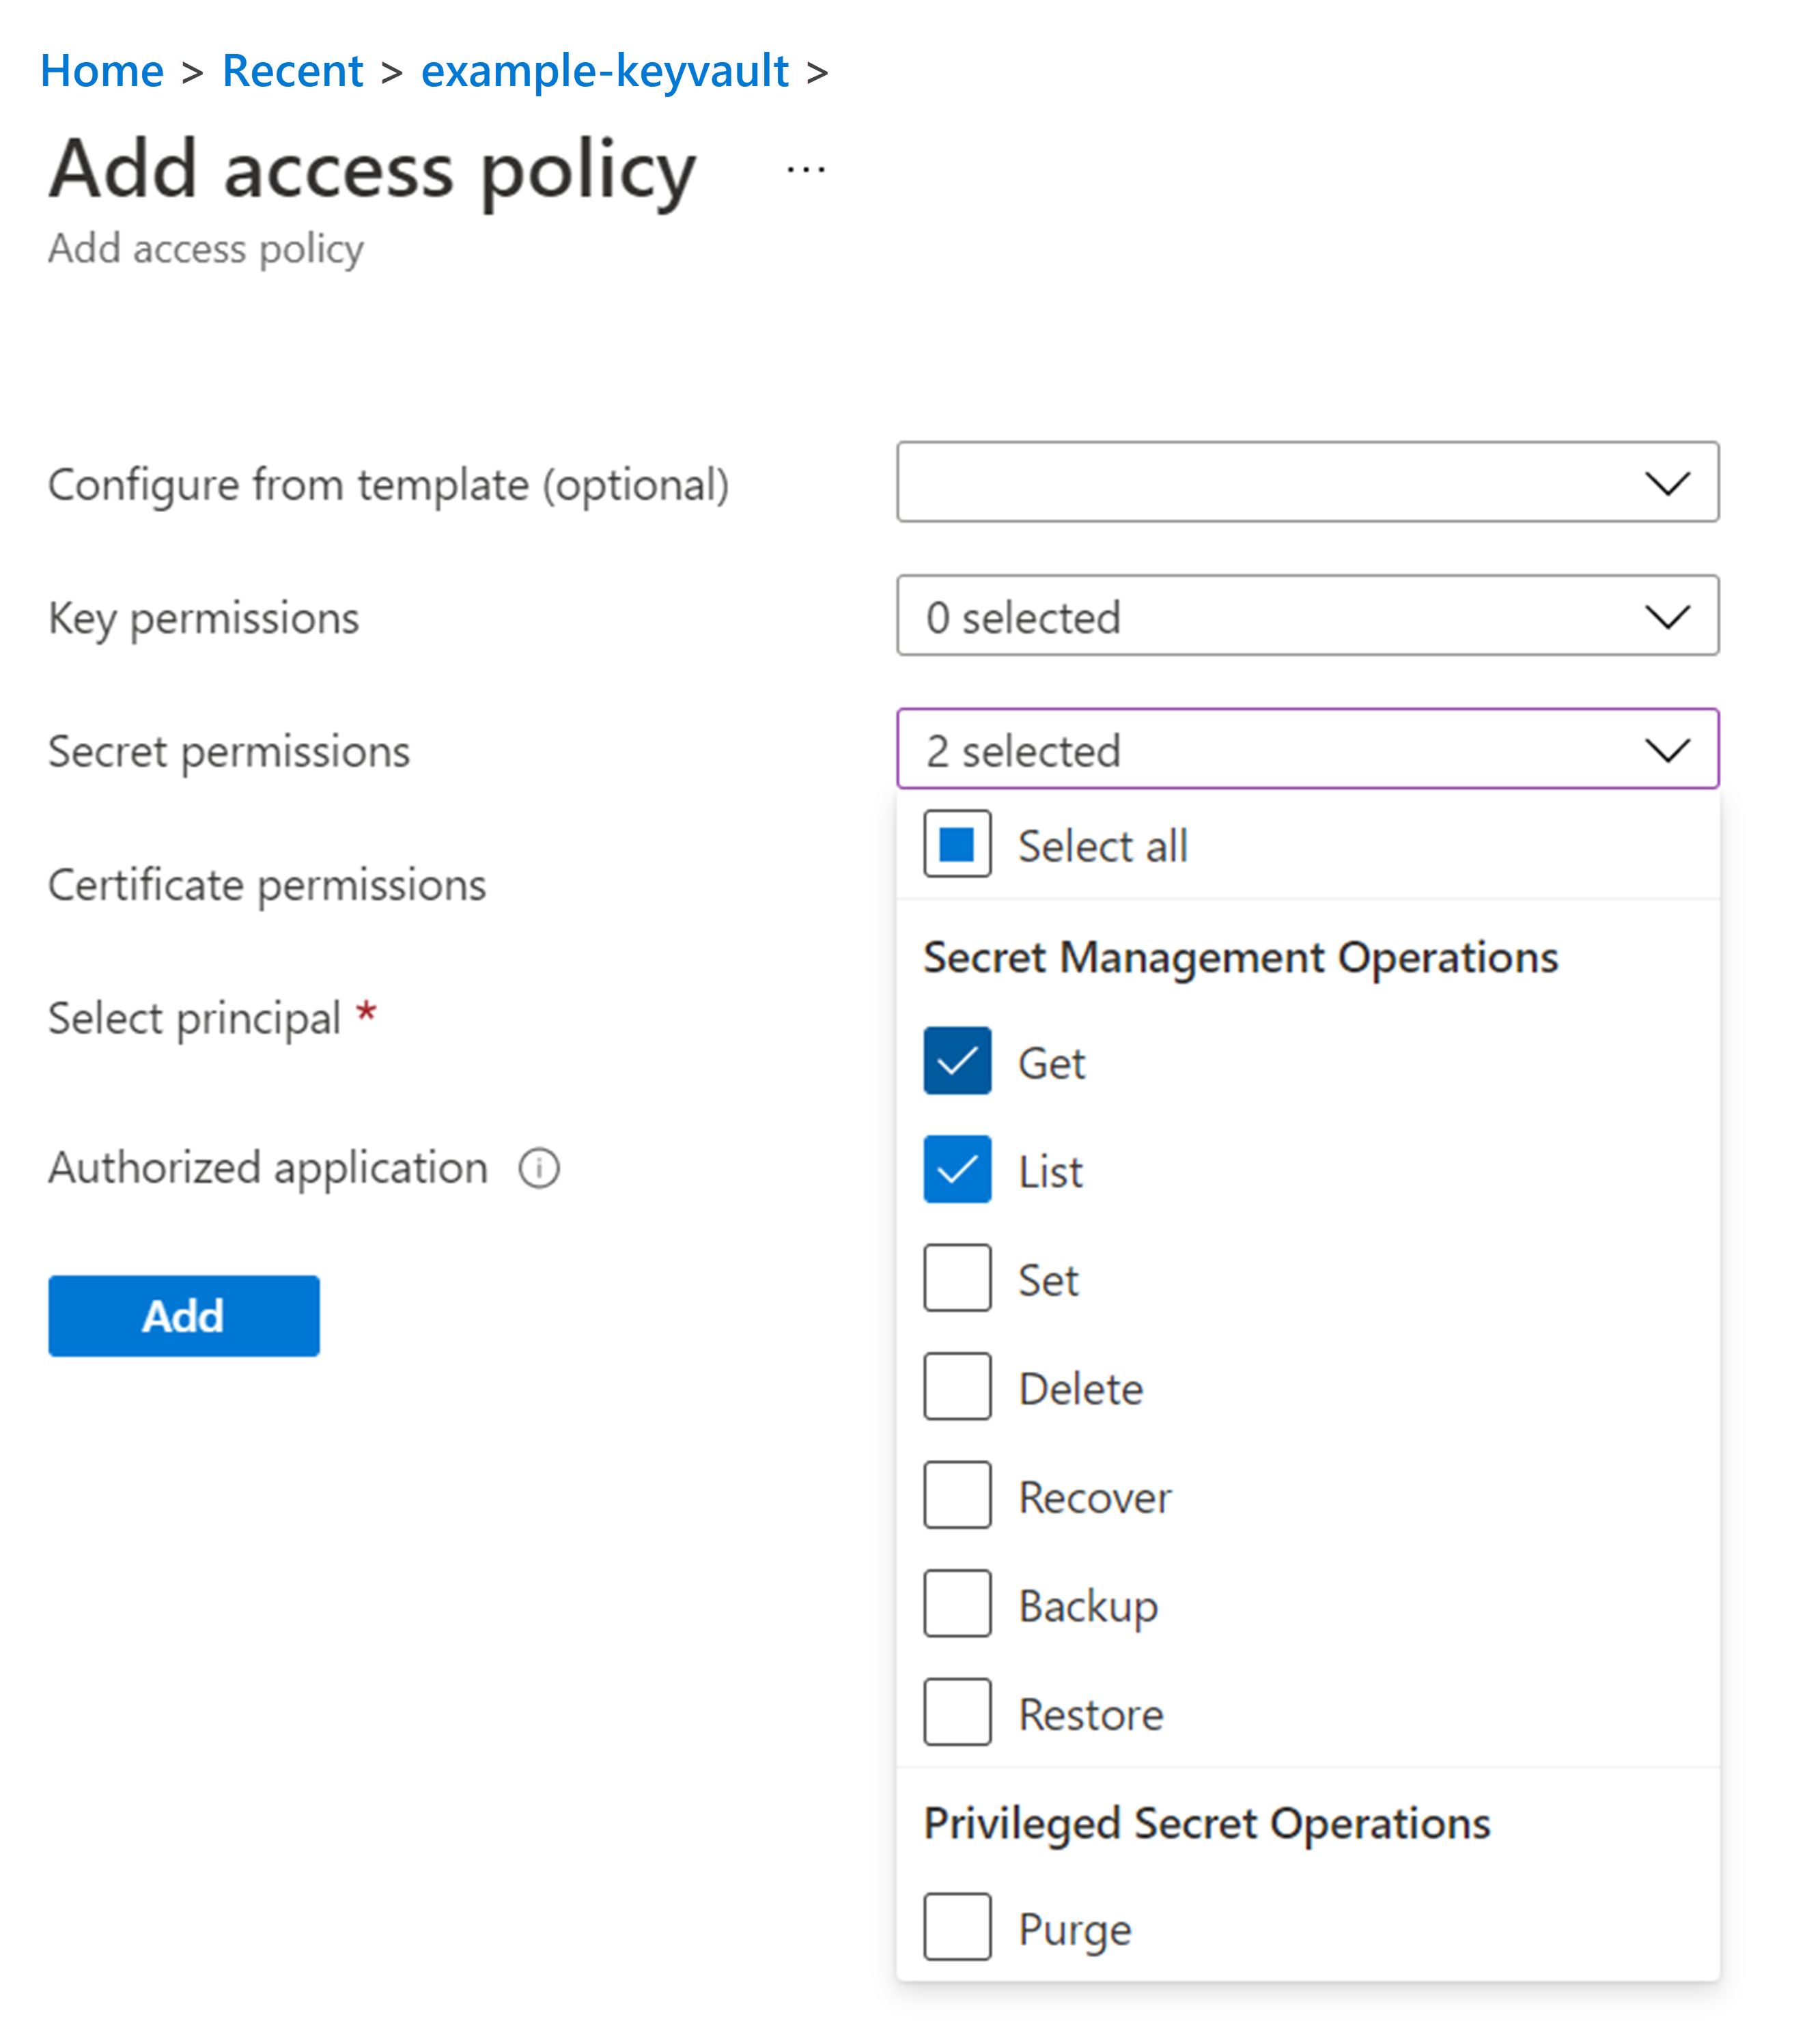 Screenshot that shows selecting Get and List permissions from the Secret permissions field on the Add access policy screen.